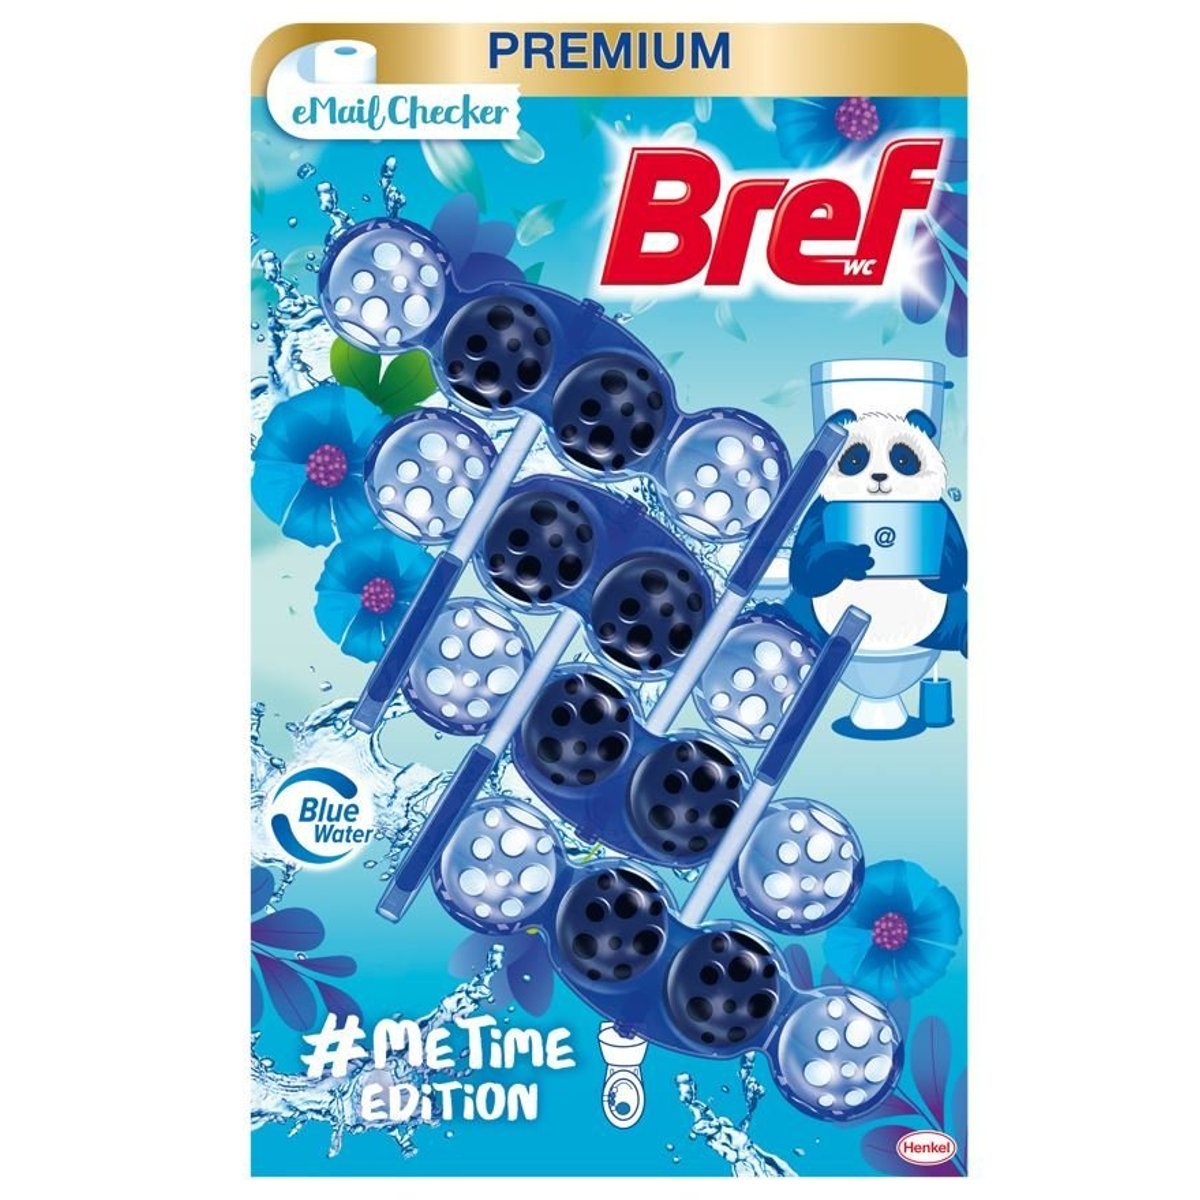 Bref eMail Checker Me time edition WC blok 4x50 g